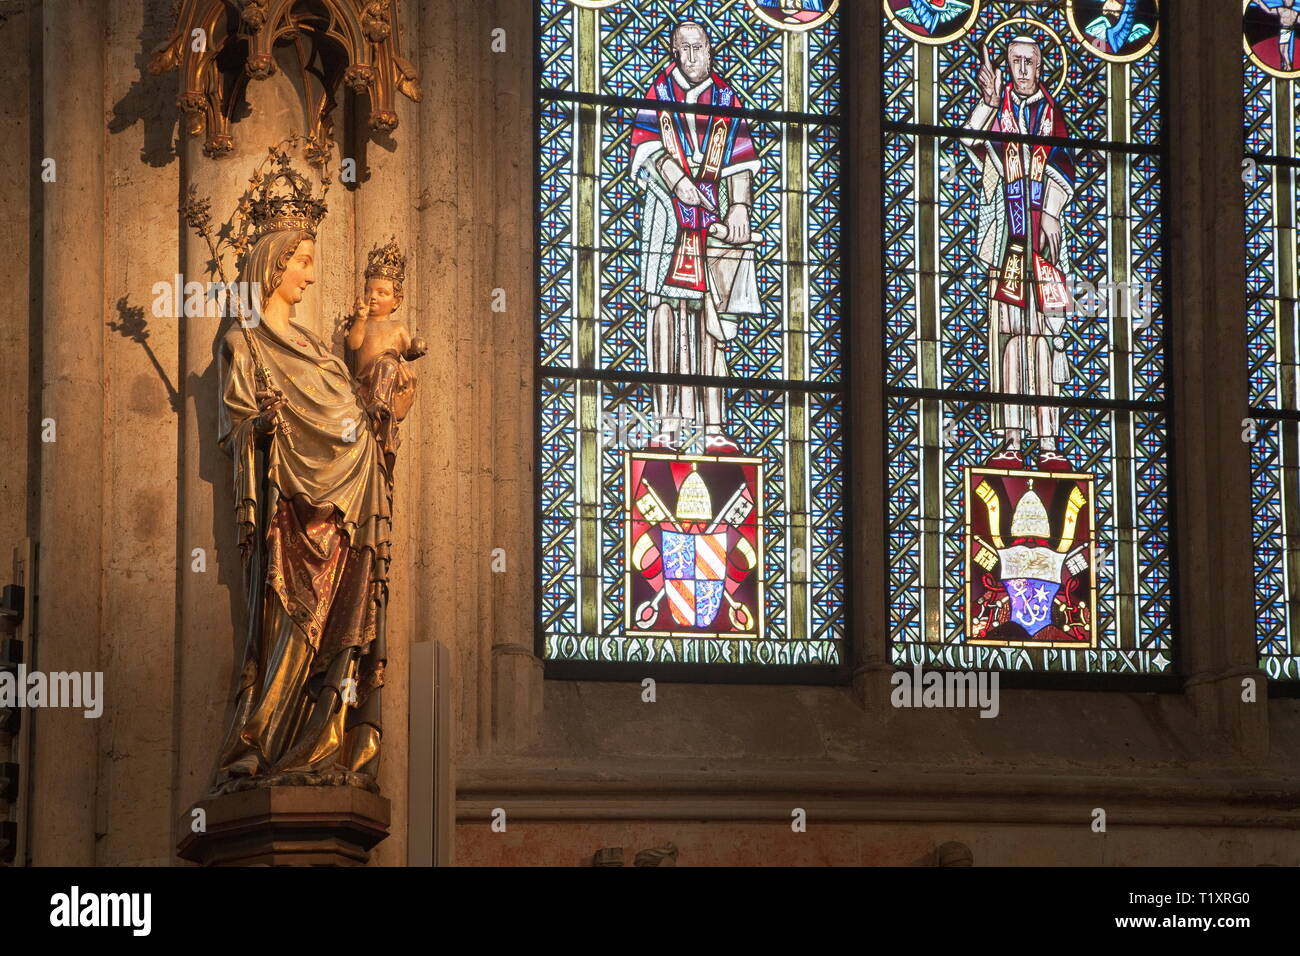 fine arts, religious art, Madonna statue in the Cologne cathedral, Artist's Copyright has not to be cleared Stock Photo